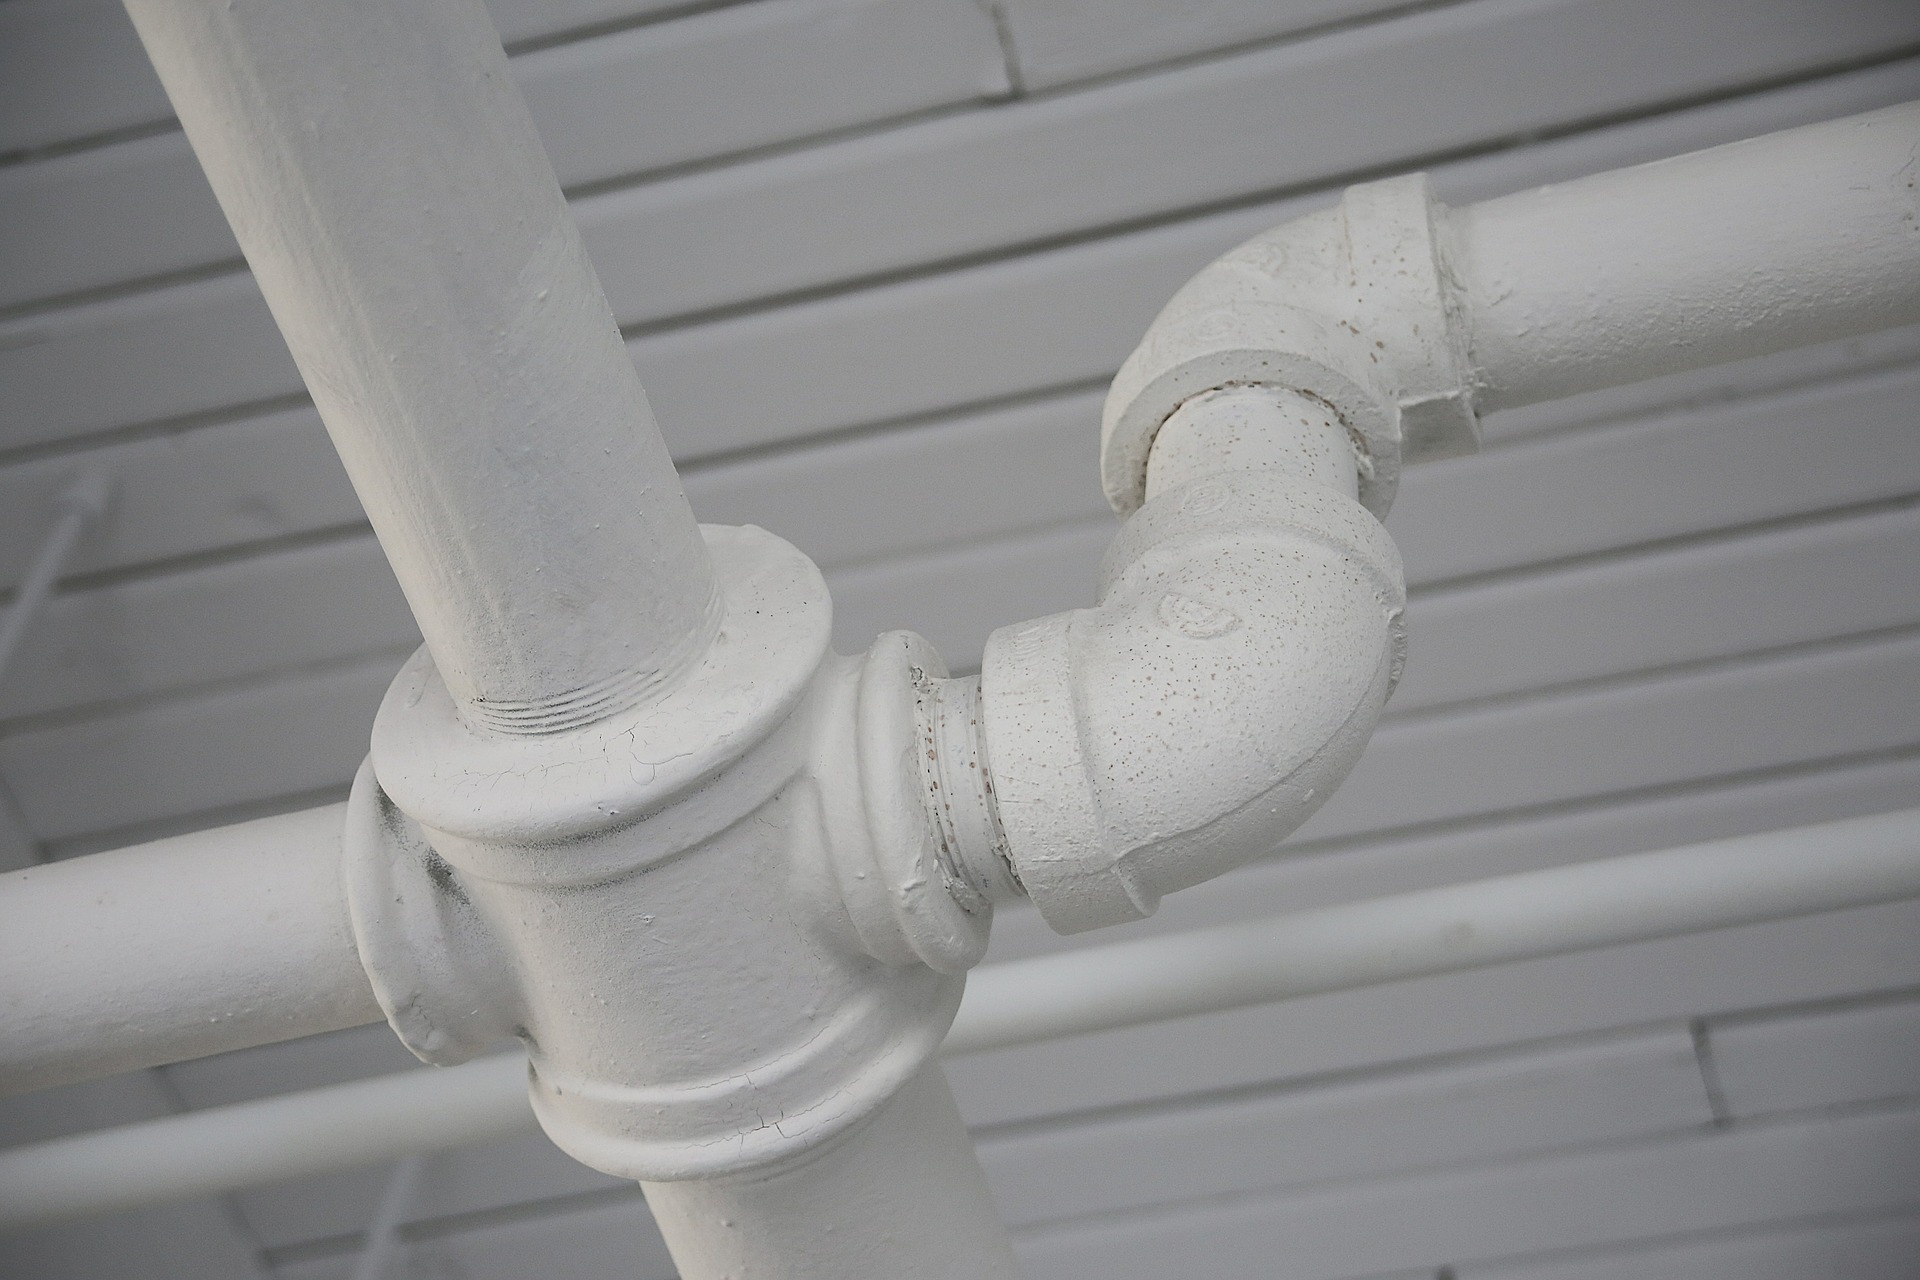 Are Plumbing & Pipe Leaks Covered By Homeowners Insurance?